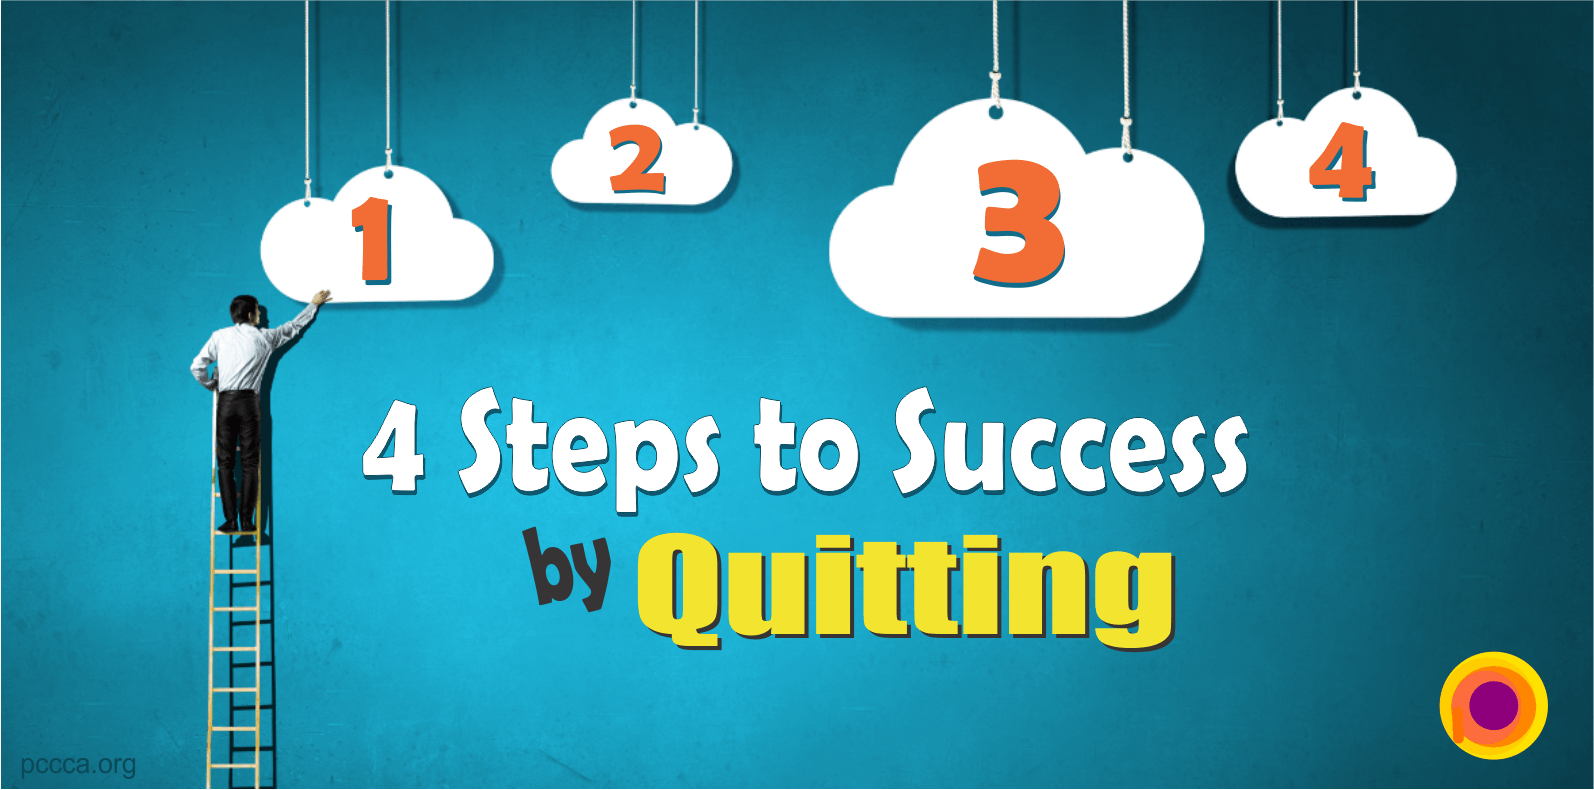 4 Steps to Success by Quitting - PCCCA